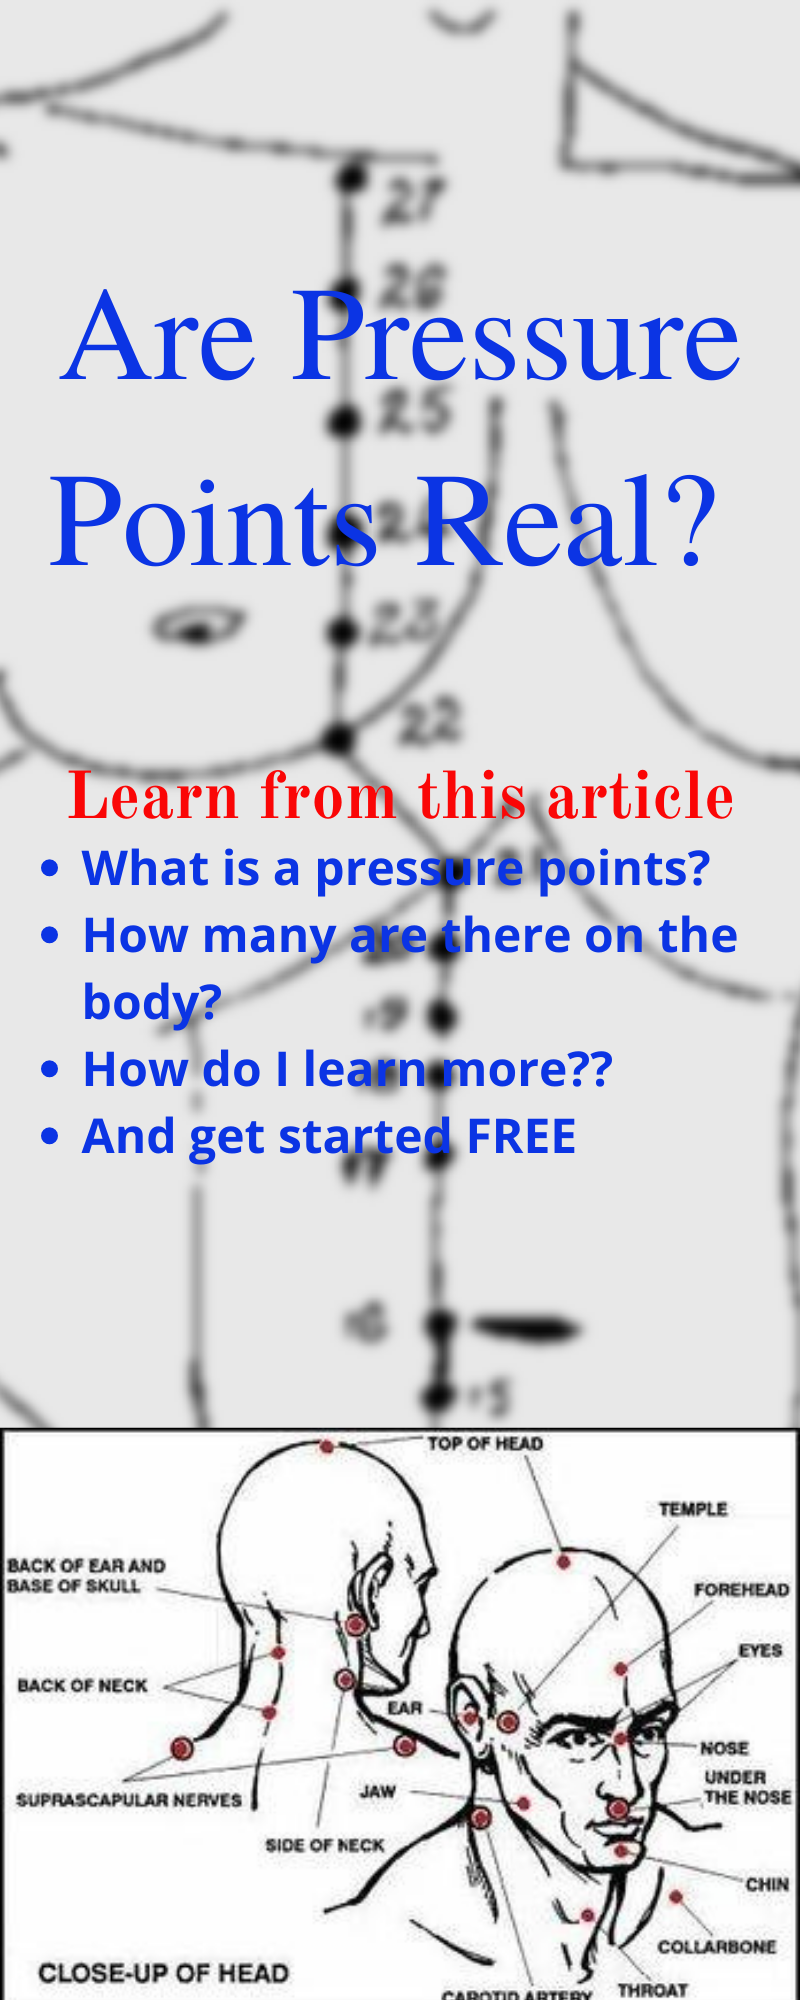 * Are Pressure Points Real? 